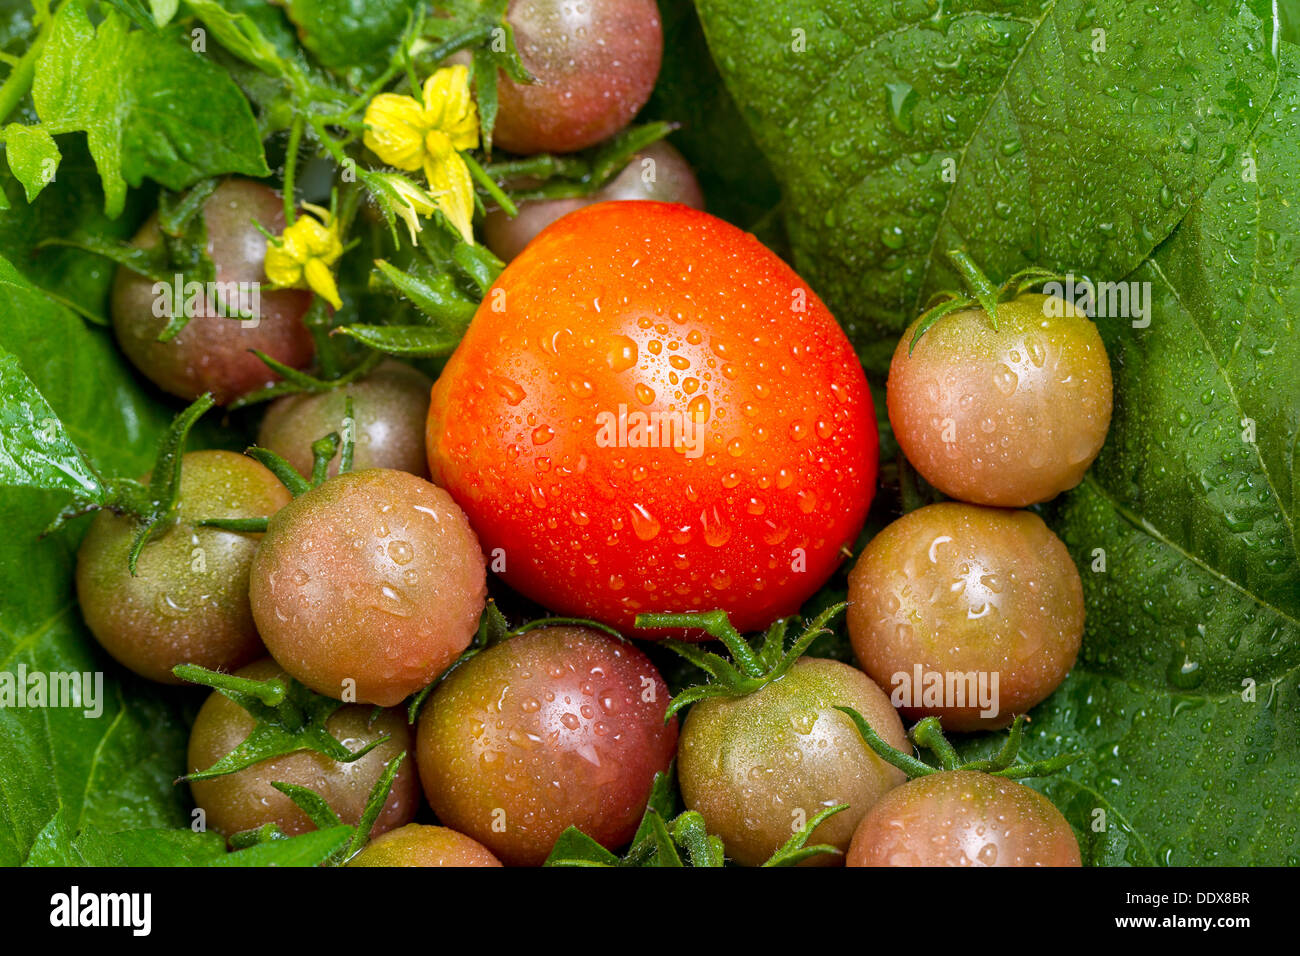 Focus on single large ripe tomato in a pile of freshly picked small tomatoes, water droplets on them, with green leaves and yell Stock Photo